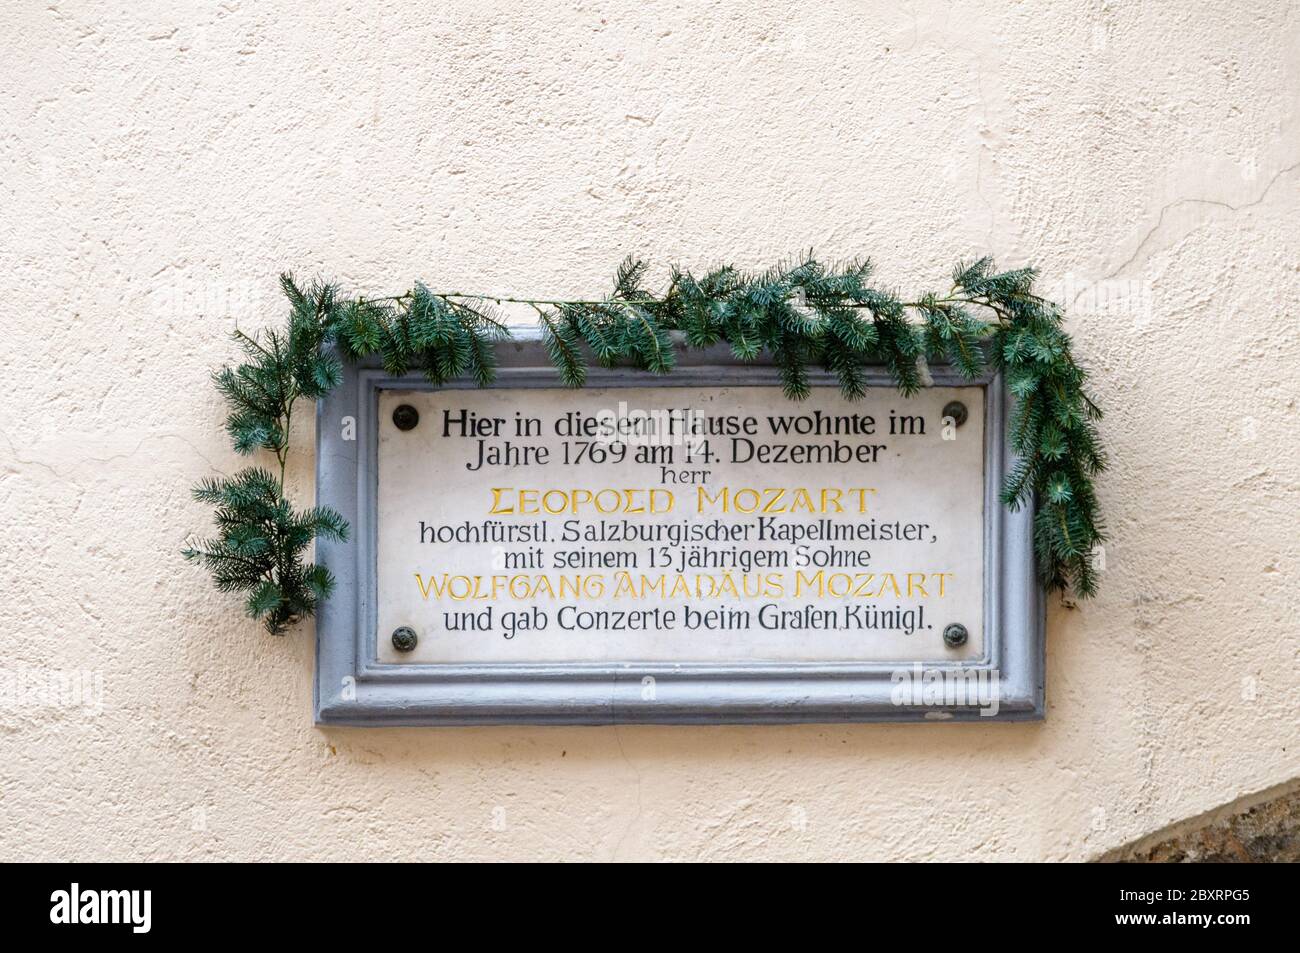 INNSBRUCK, AUSTRIA - MAY 11, 2013: The plaquette in the wall of the hotel Weisses Kreuz in Innsbruck Austria. According to the text the young Wolfgang Stock Photo